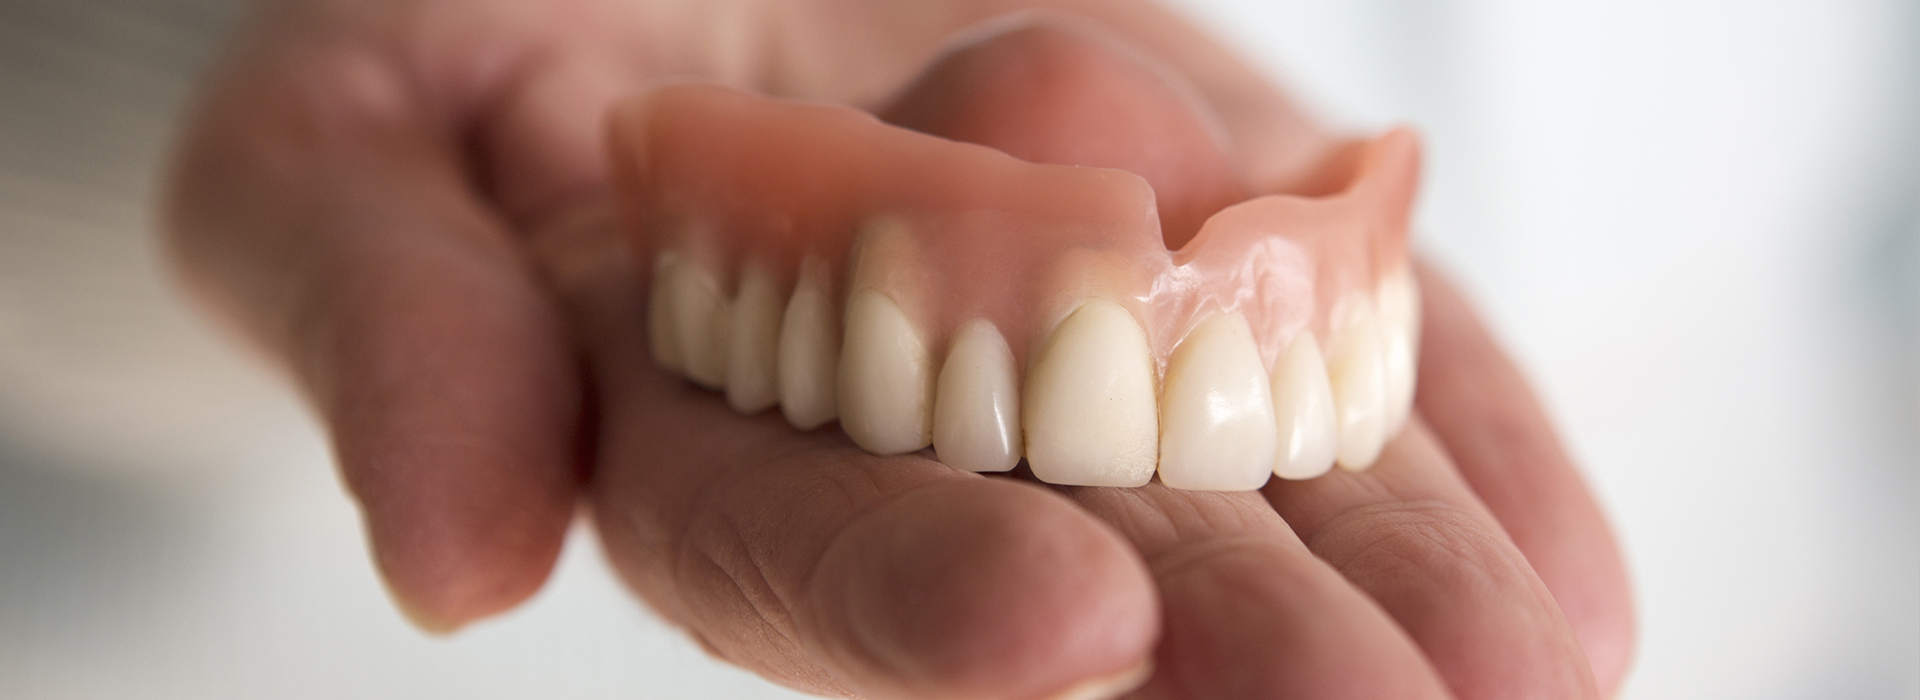 An individual s hand holding a set of dentures with visible teeth.